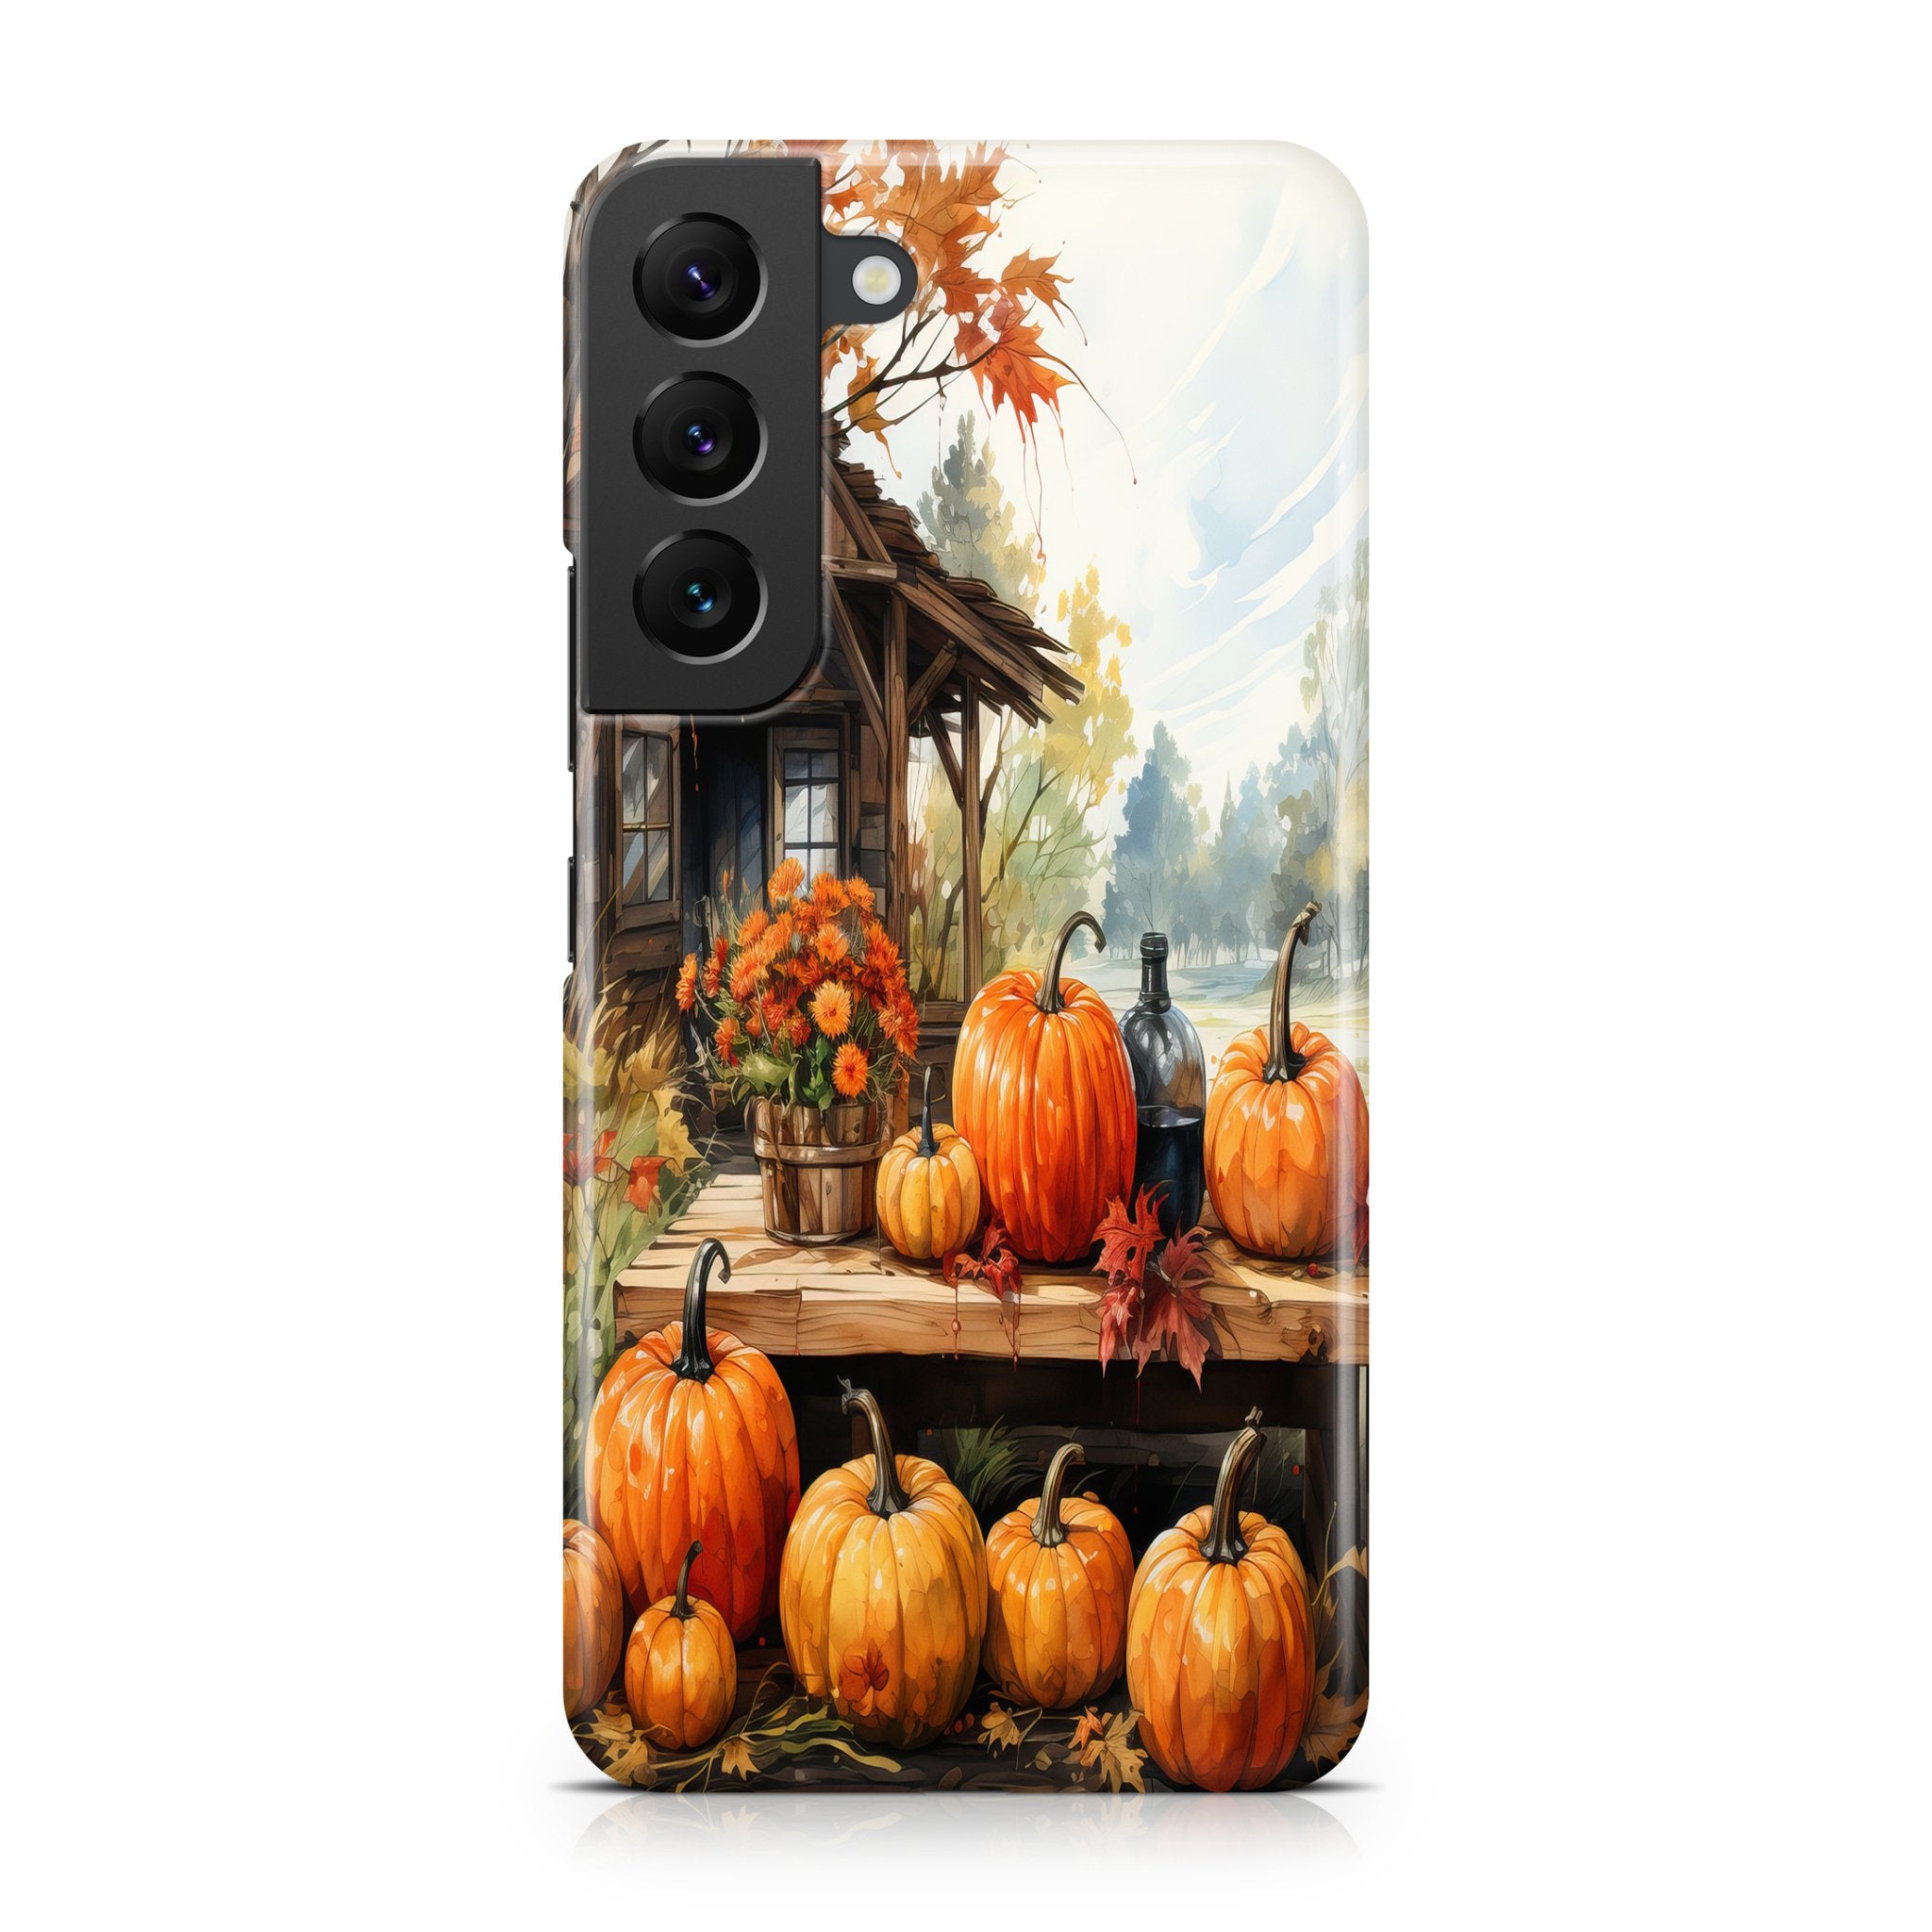 Fall Farm Harvest - Samsung phone case designs by CaseSwagger